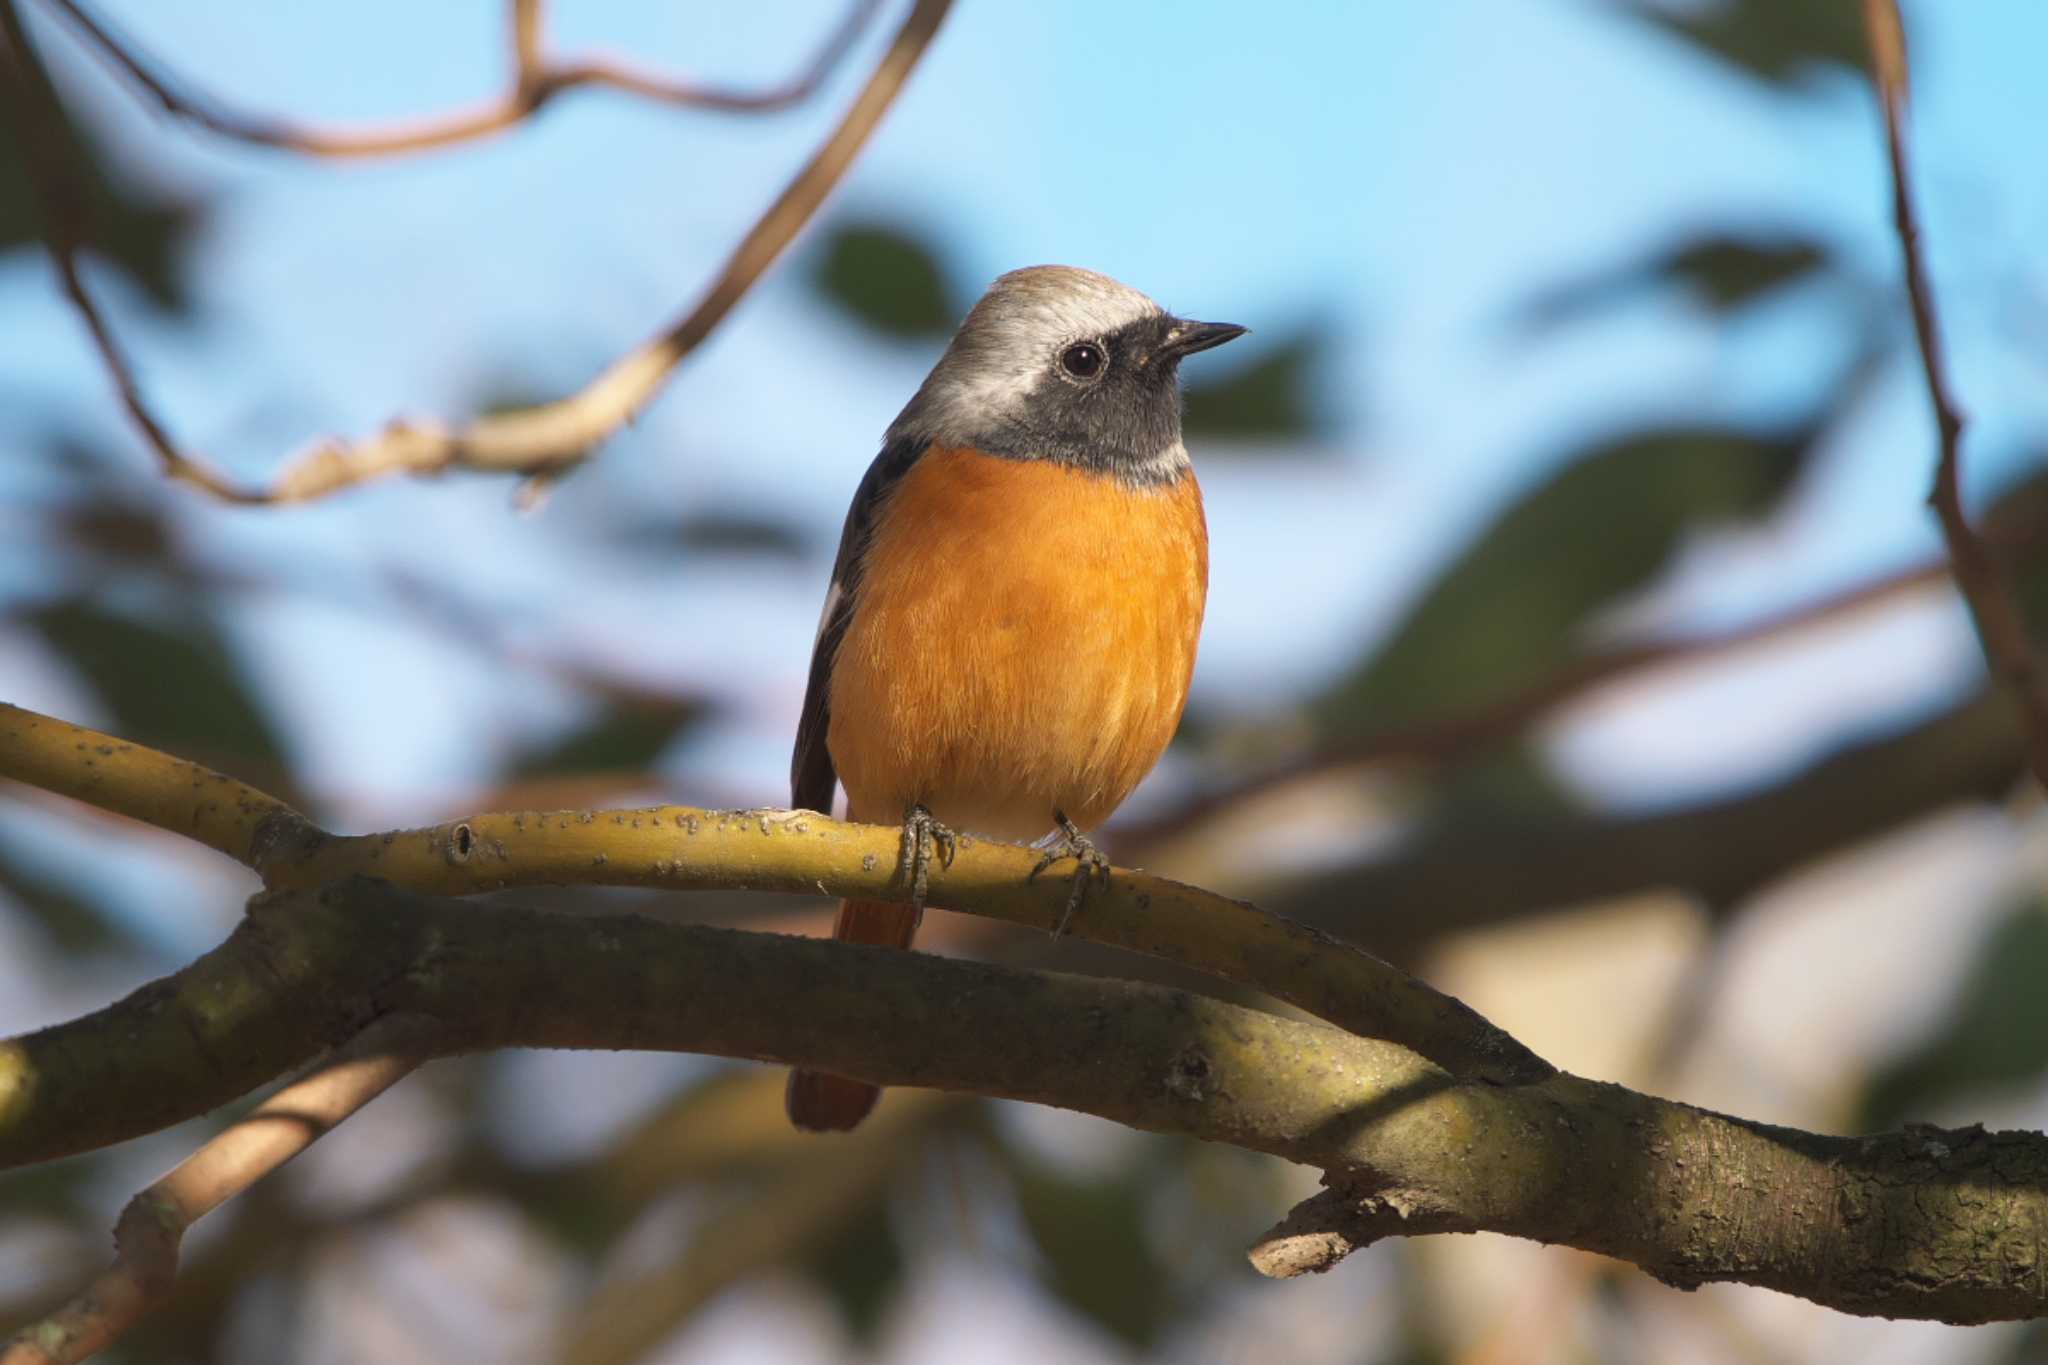 Photo of Daurian Redstart at まつぶし緑の丘公園 by Y. Watanabe